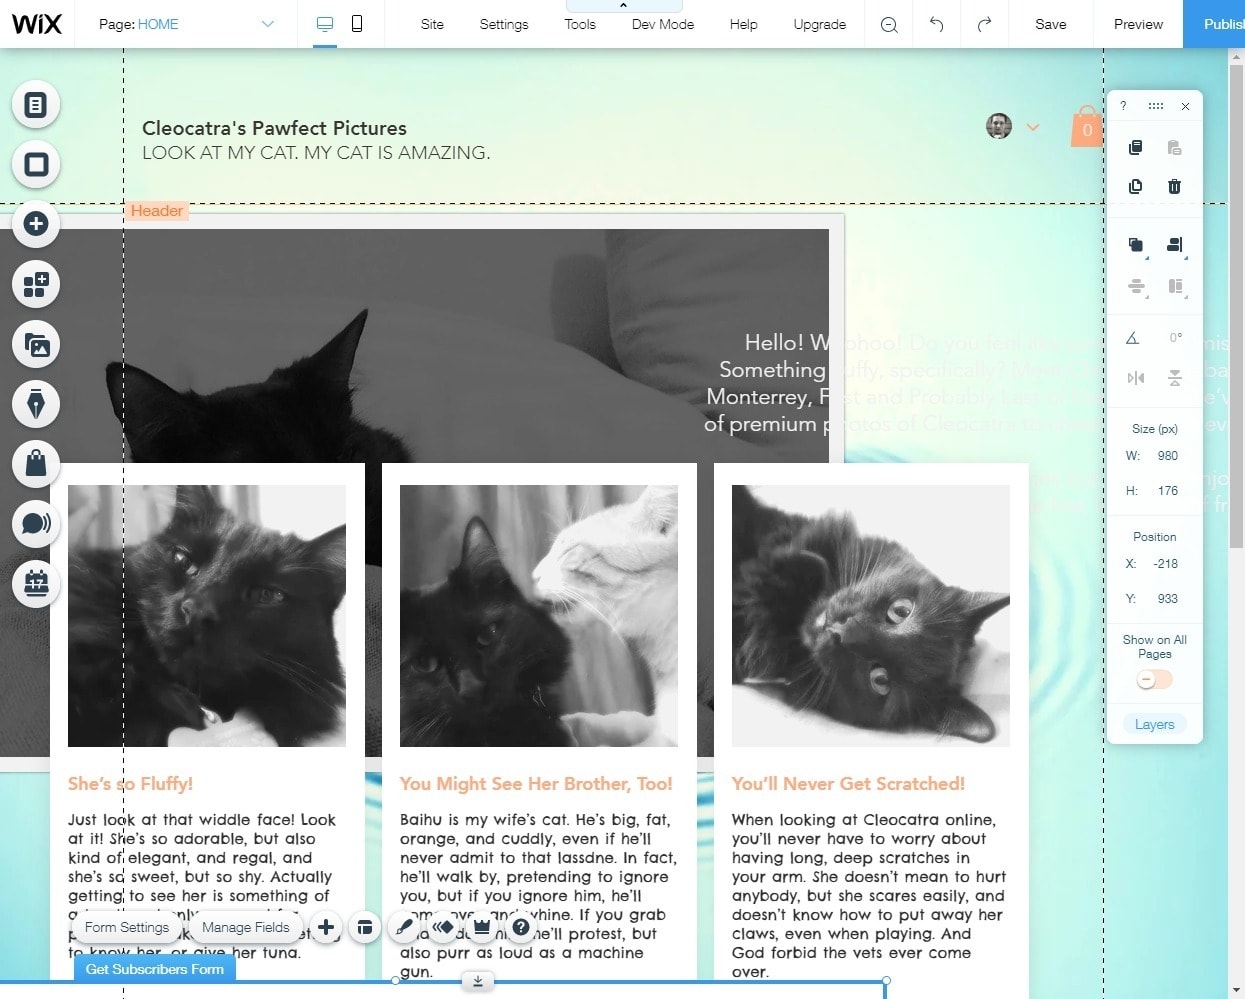 Wix lets you move elements anywhere on your page